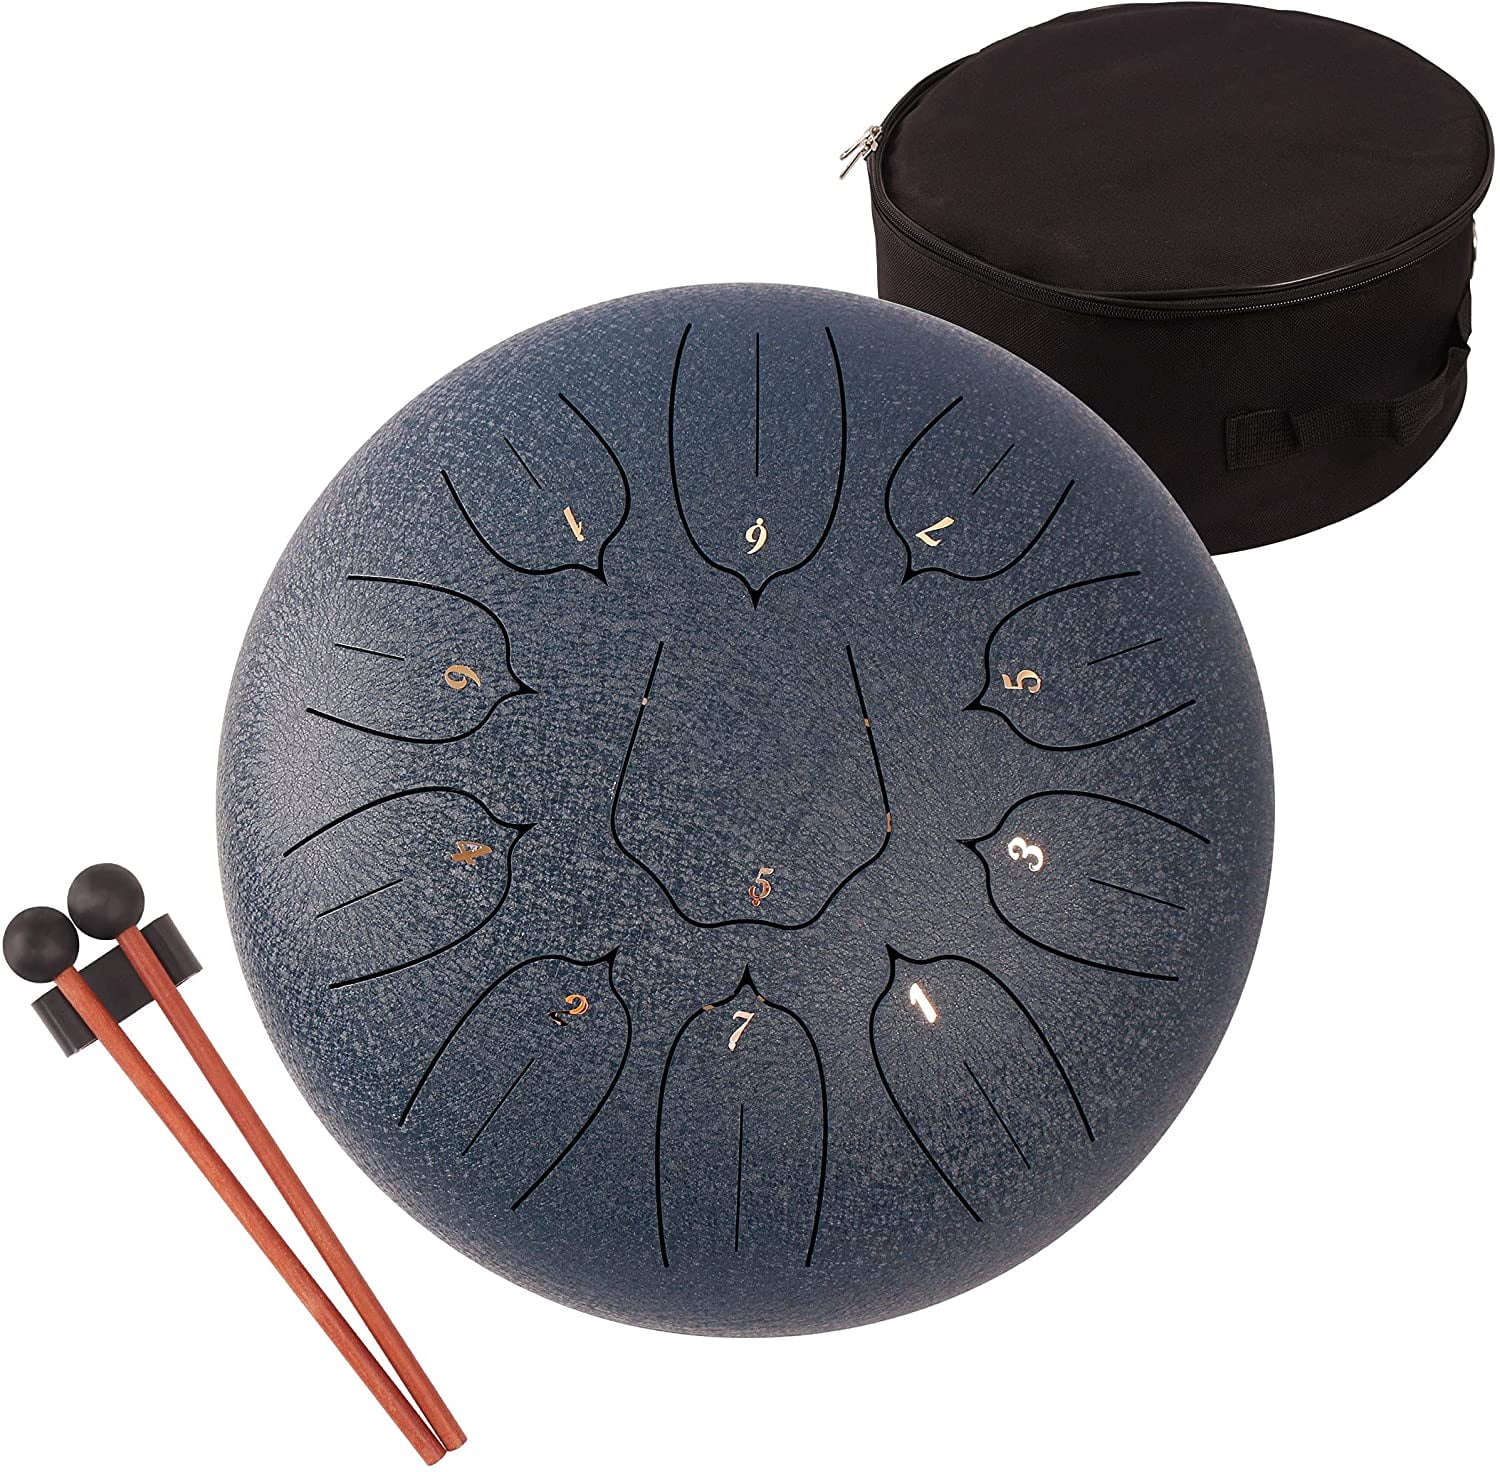 ERINGOGO 1 Set Note hand drums for adults Wood pocket drum hand plate  musical instrument hand drum yoga Stainless steel storage bag pocket steel  pan